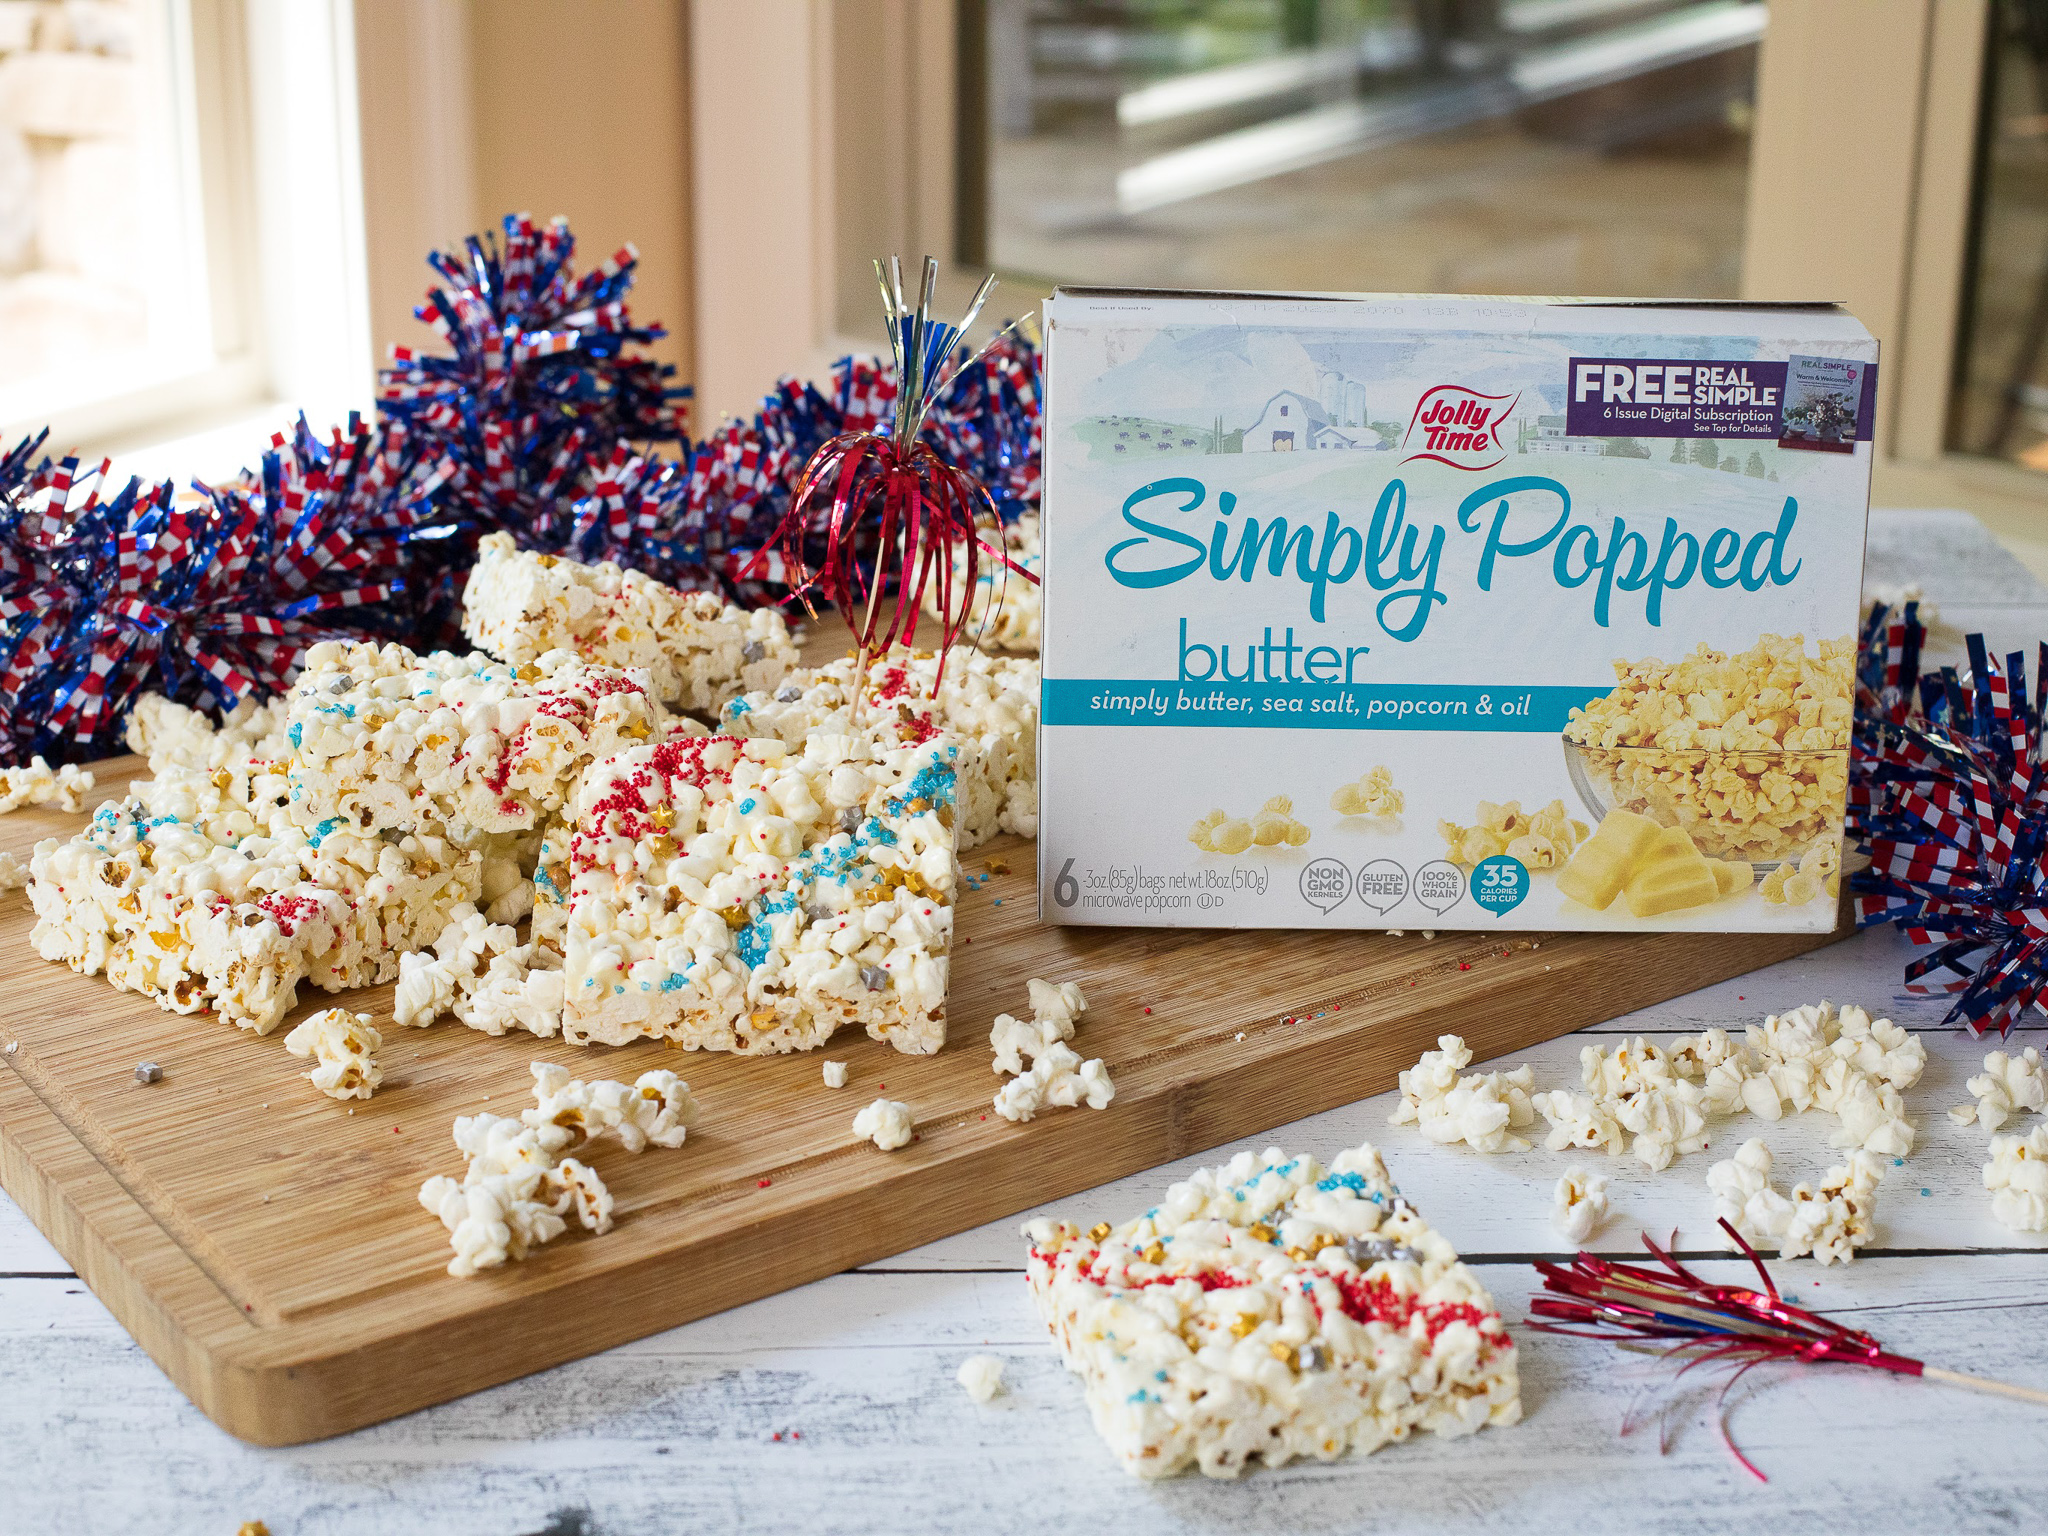 Serve Up Some Marshmallow Popcorn Squares With JOLLY TIME Pop Corn – On Sale BOGO At Publix